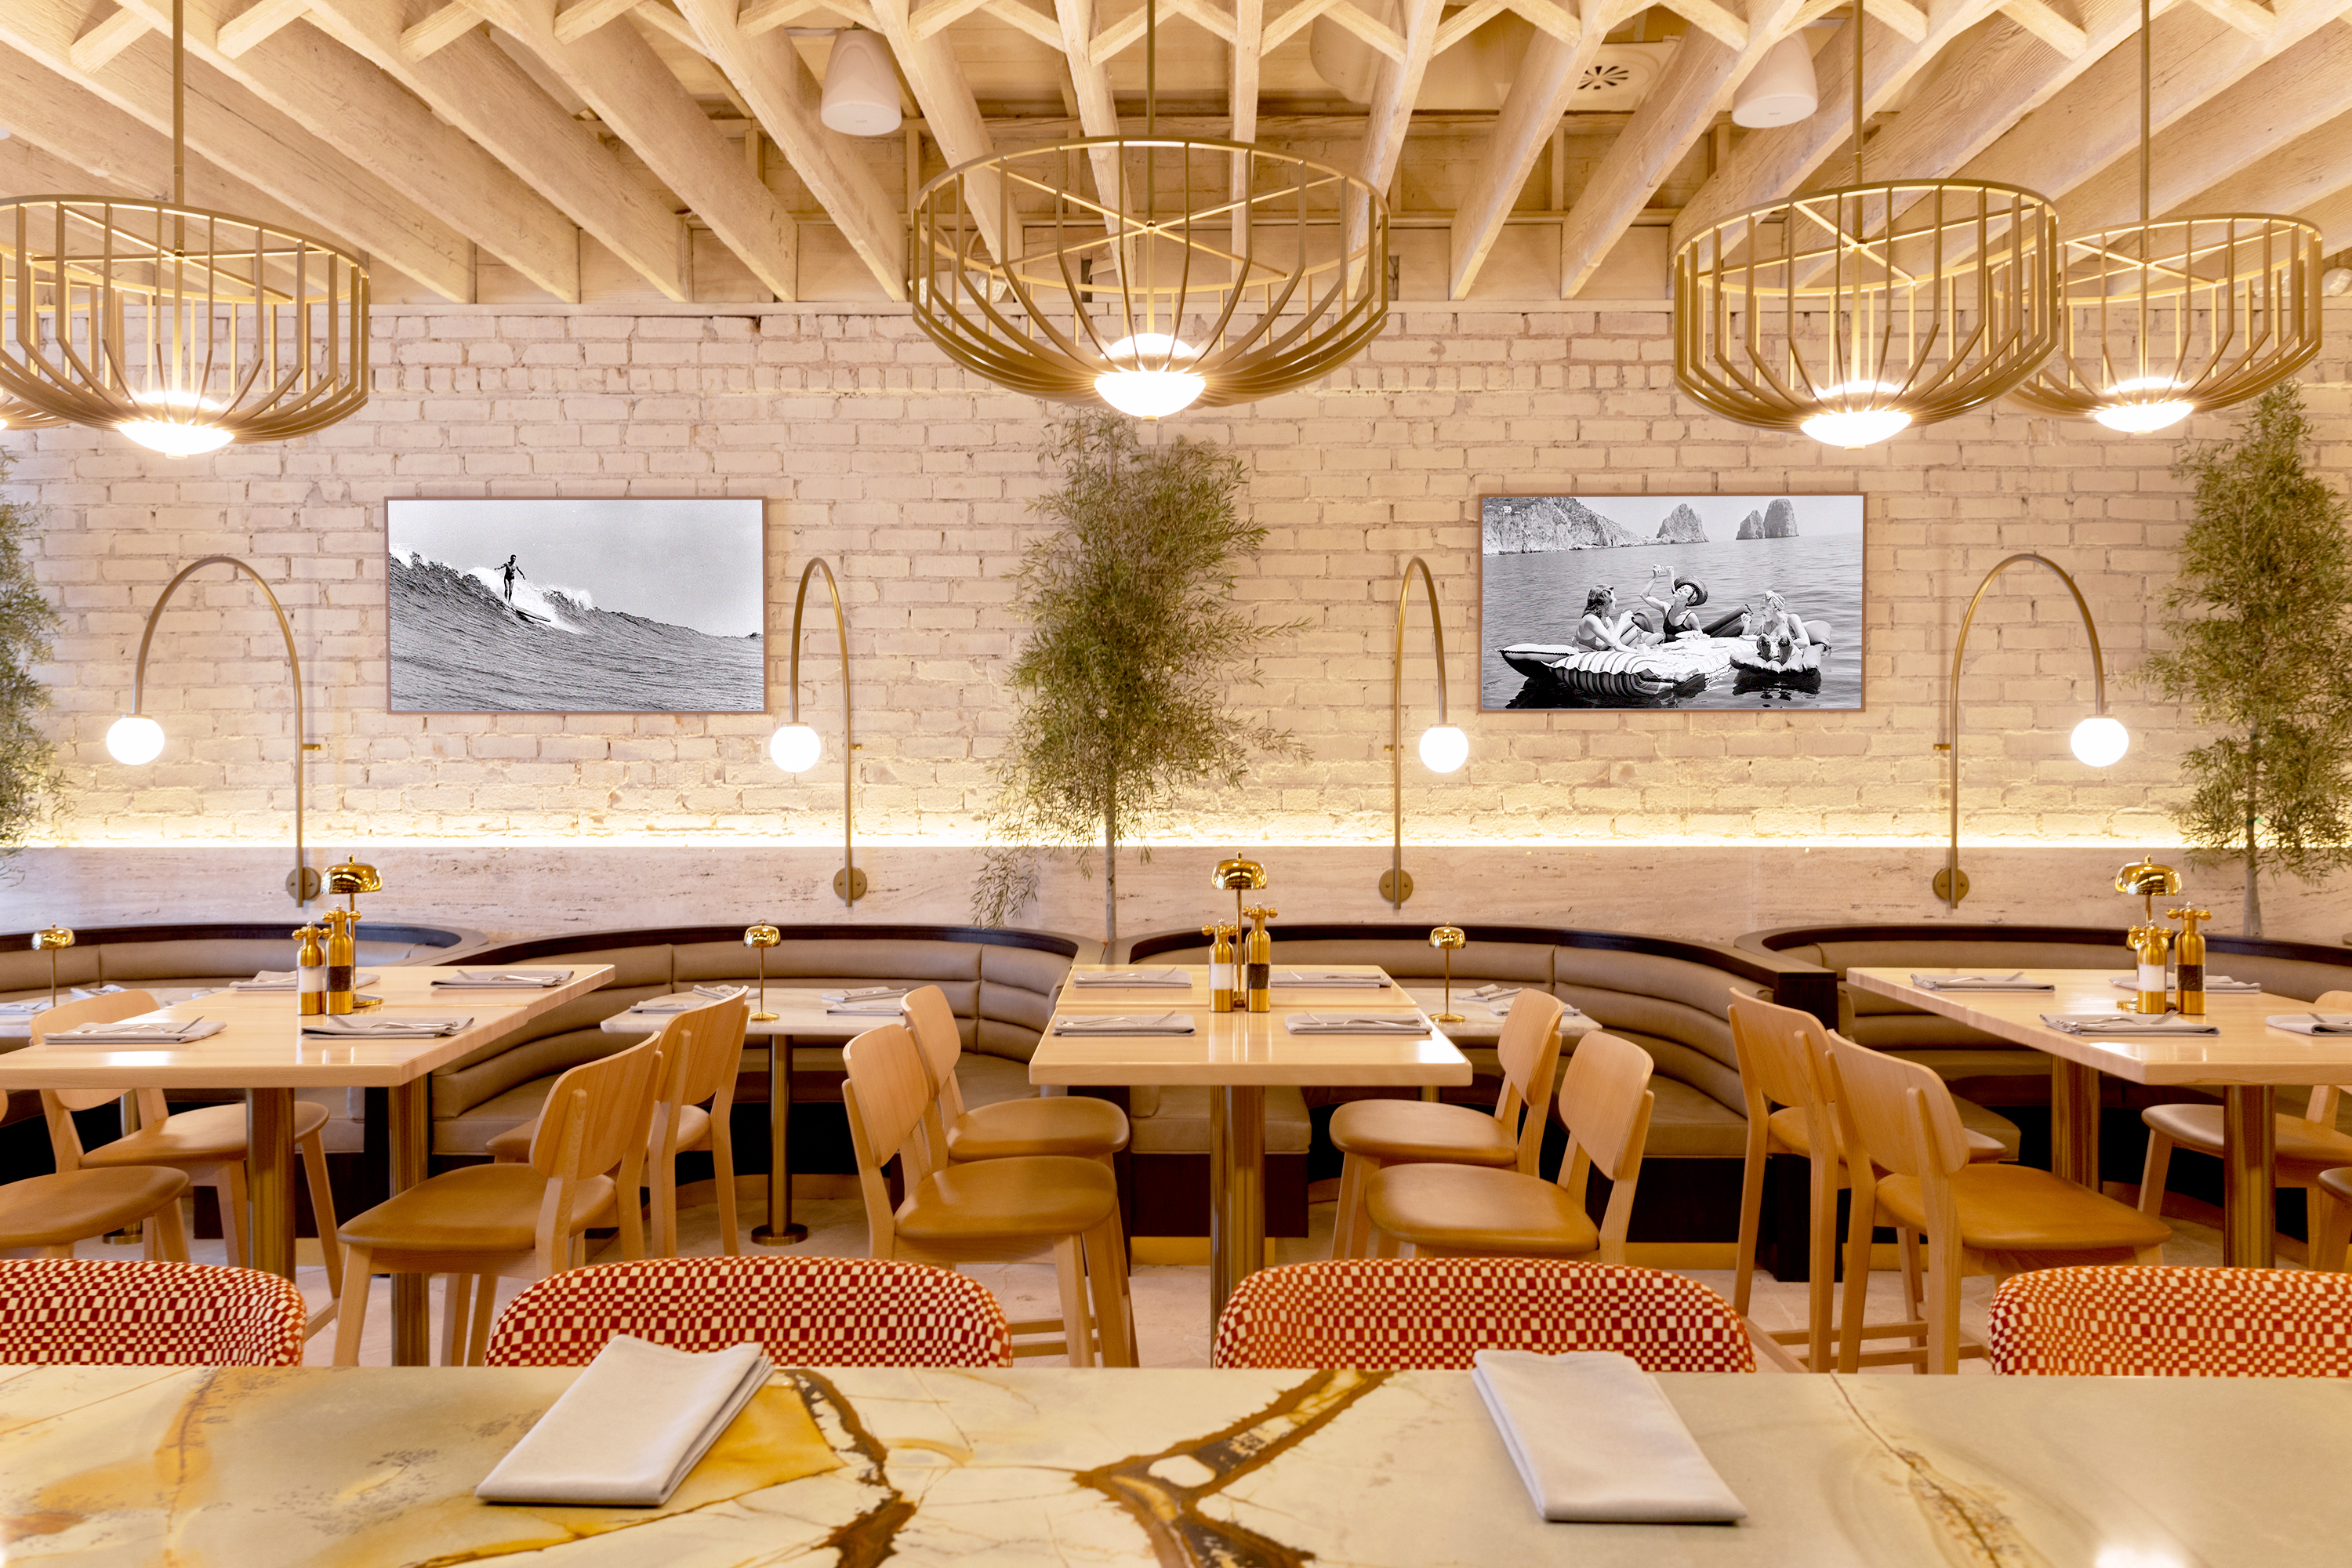 The well-designed new interior of an all-day restaurant in Manhattan Beach called Brewco Social.